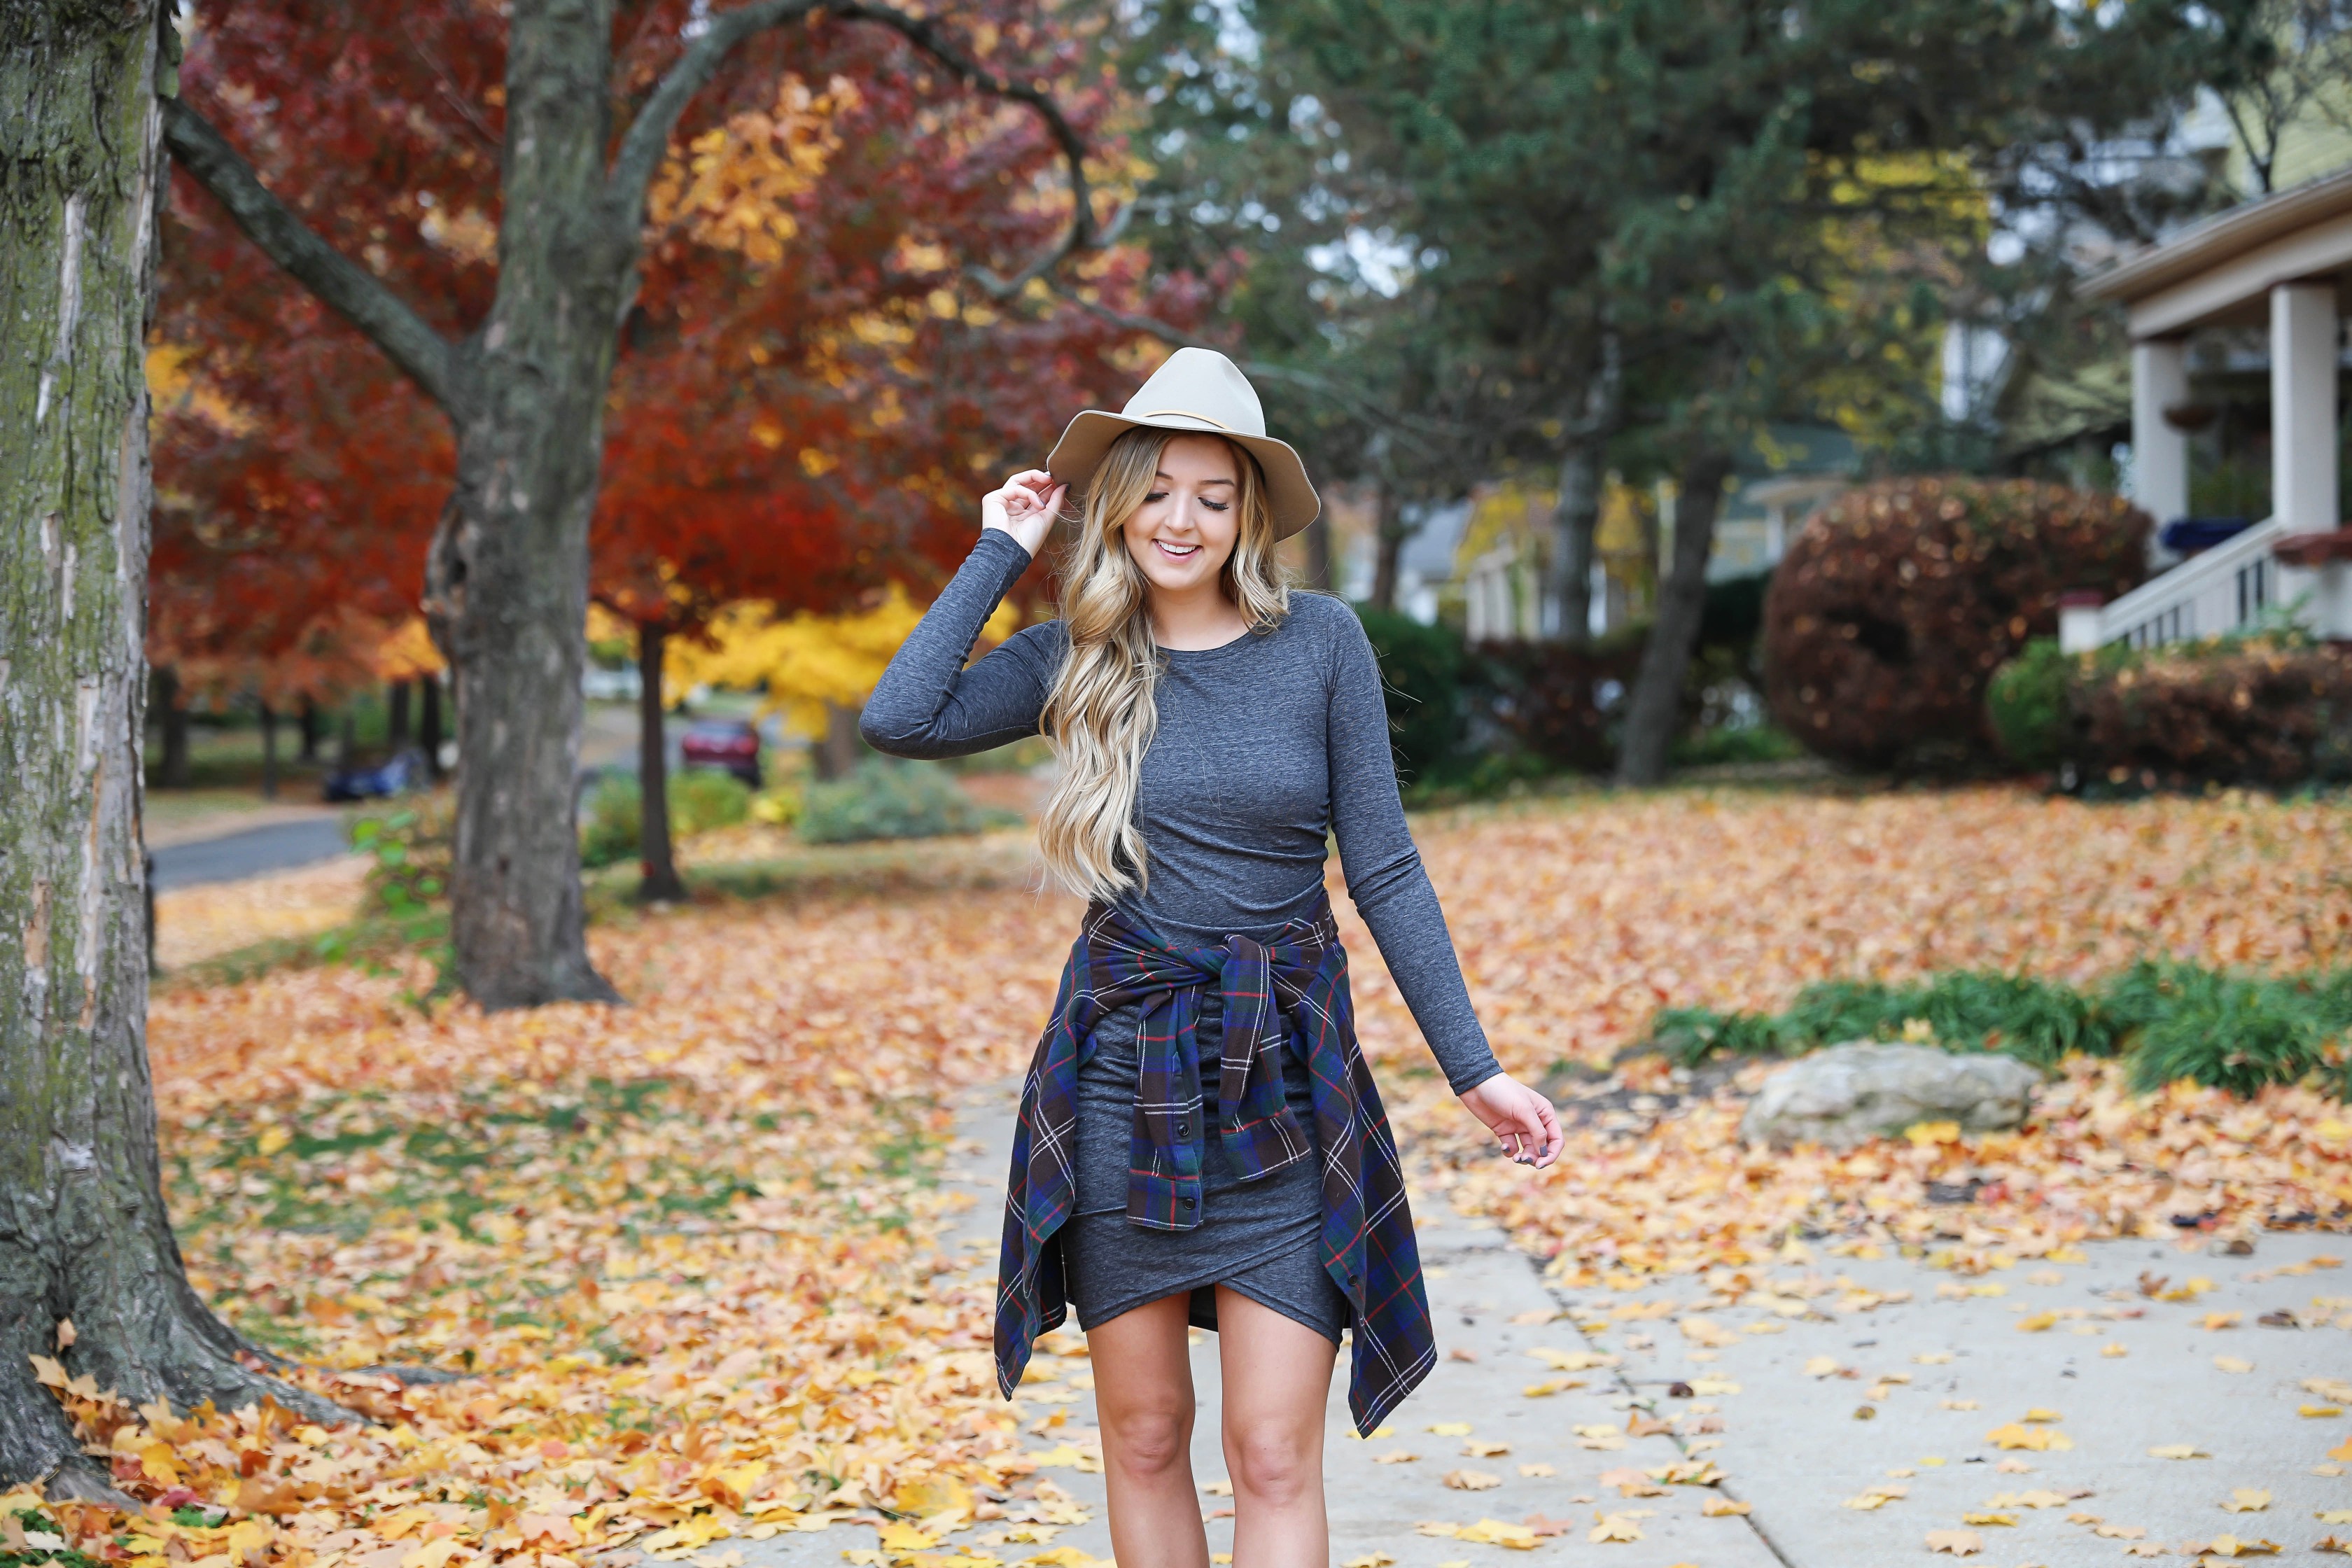 Gray long sleeve flattering dress with a cute flannel tied around the waist! These photos were taken in the prettiest fall leaves! I paired the outfit with this cute felt hat and suede booties! Details on fashion blog daily dose of charm by lauren lindmark